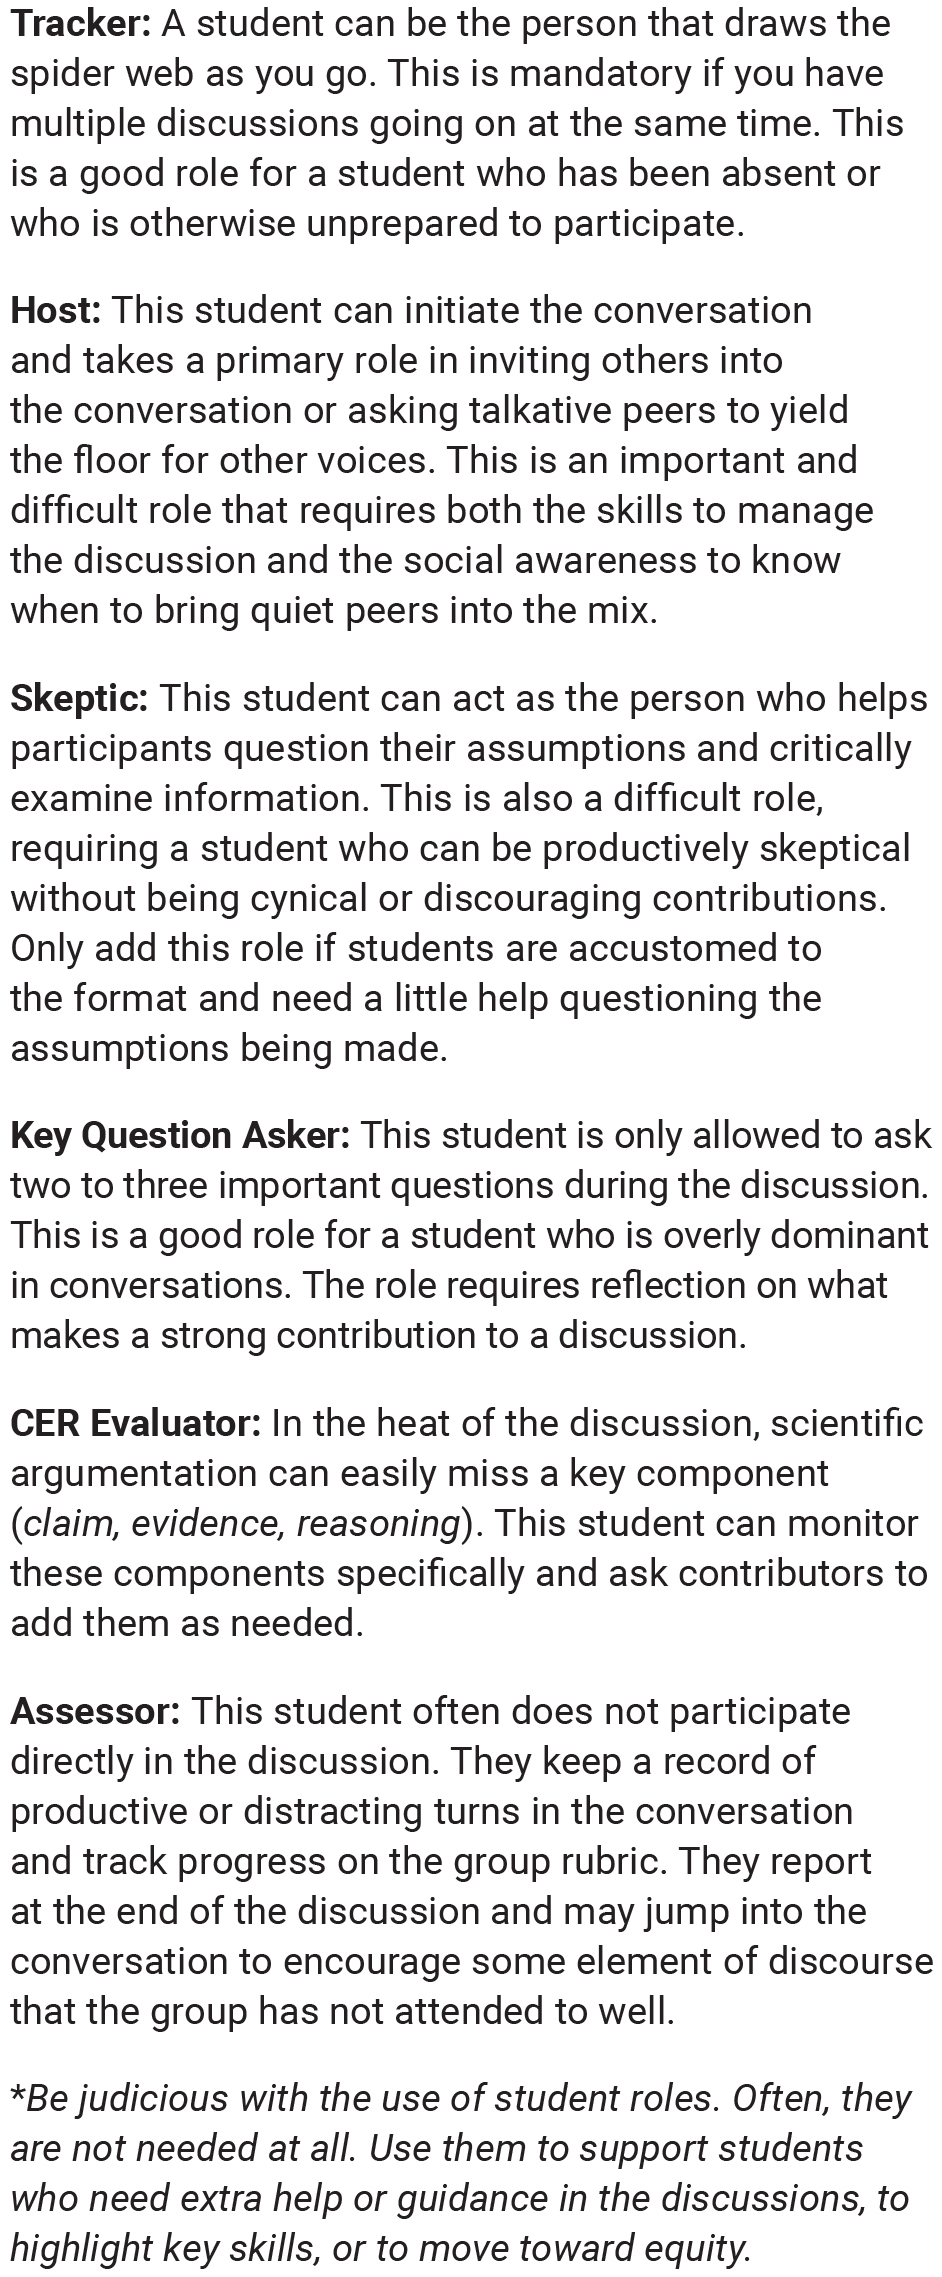 Student roles that can be assigned for the discussions